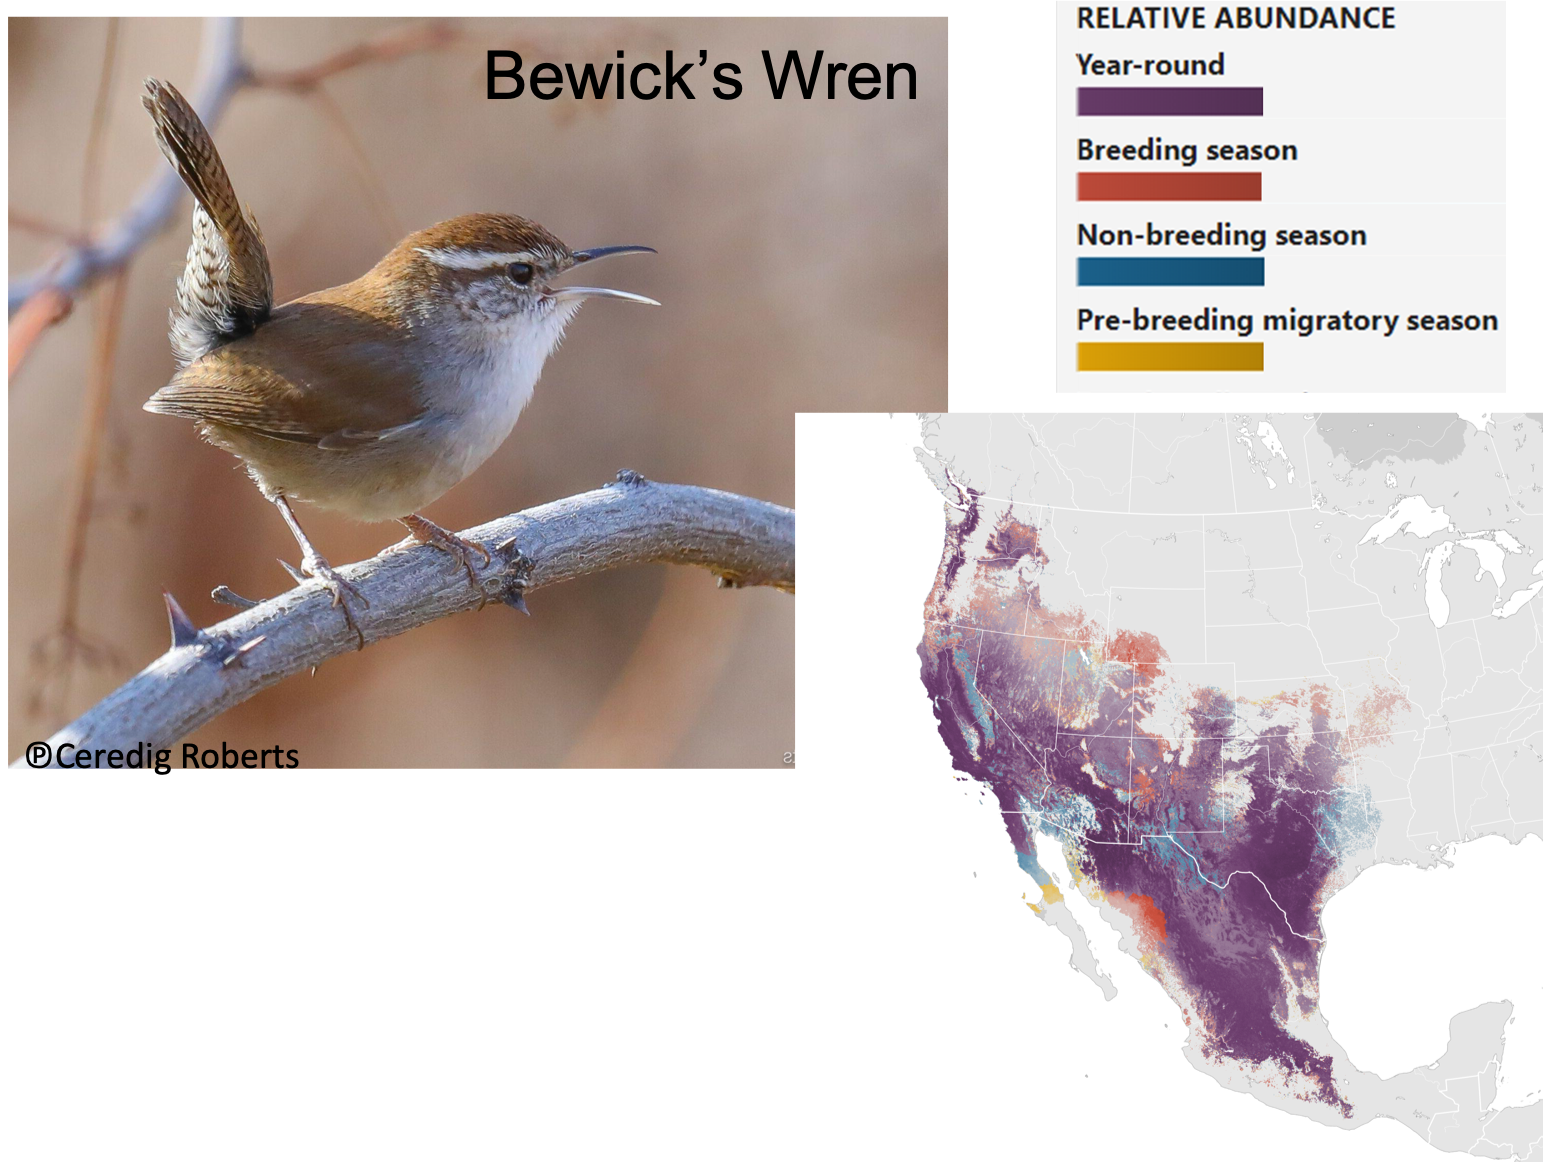 Picture of Bewick's wren and map of North America showing relative abundance of its presence.